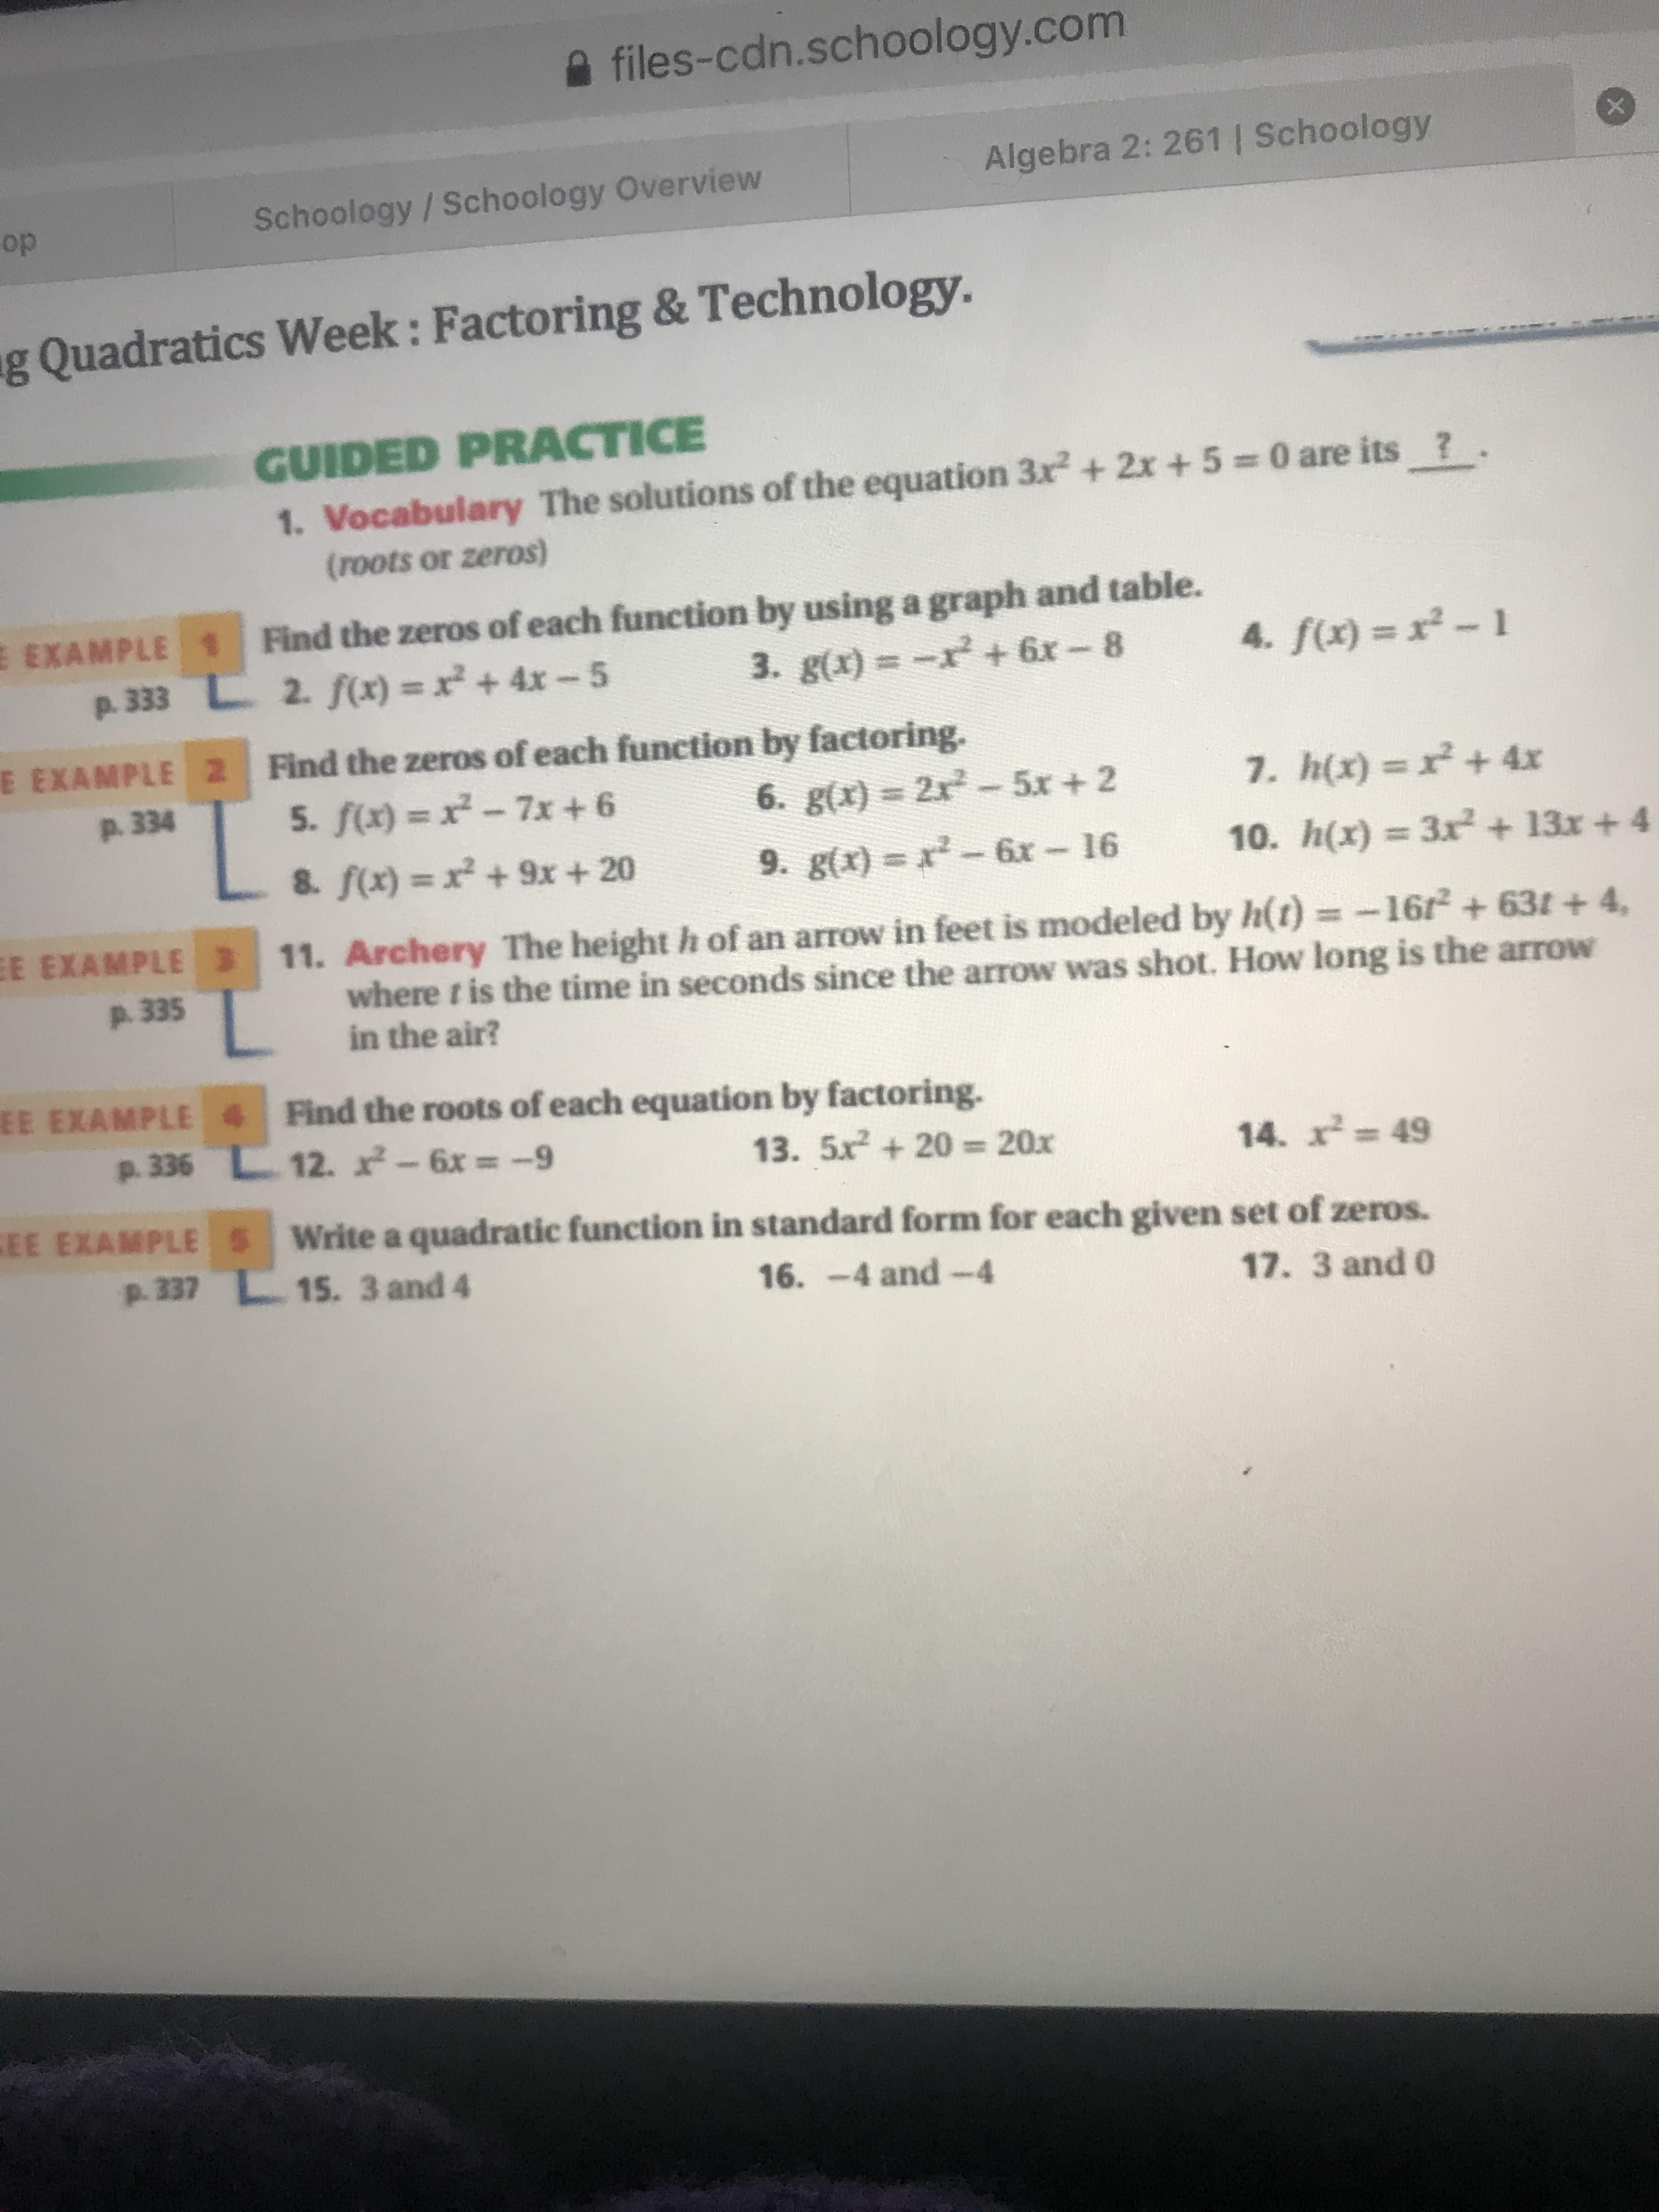 GUIDED PRACTICE
1. Vocabulary The solutions of the equation 3x + 2x +5 0 are its ?.
(roots or zeros)
Find the zeros of each function by using a graph and table.
2. f(x) = x + 4xr- 5
3. g(x) = -x+ 6x-8
4. f(x) = x-1
=x²-1
by factoring.
